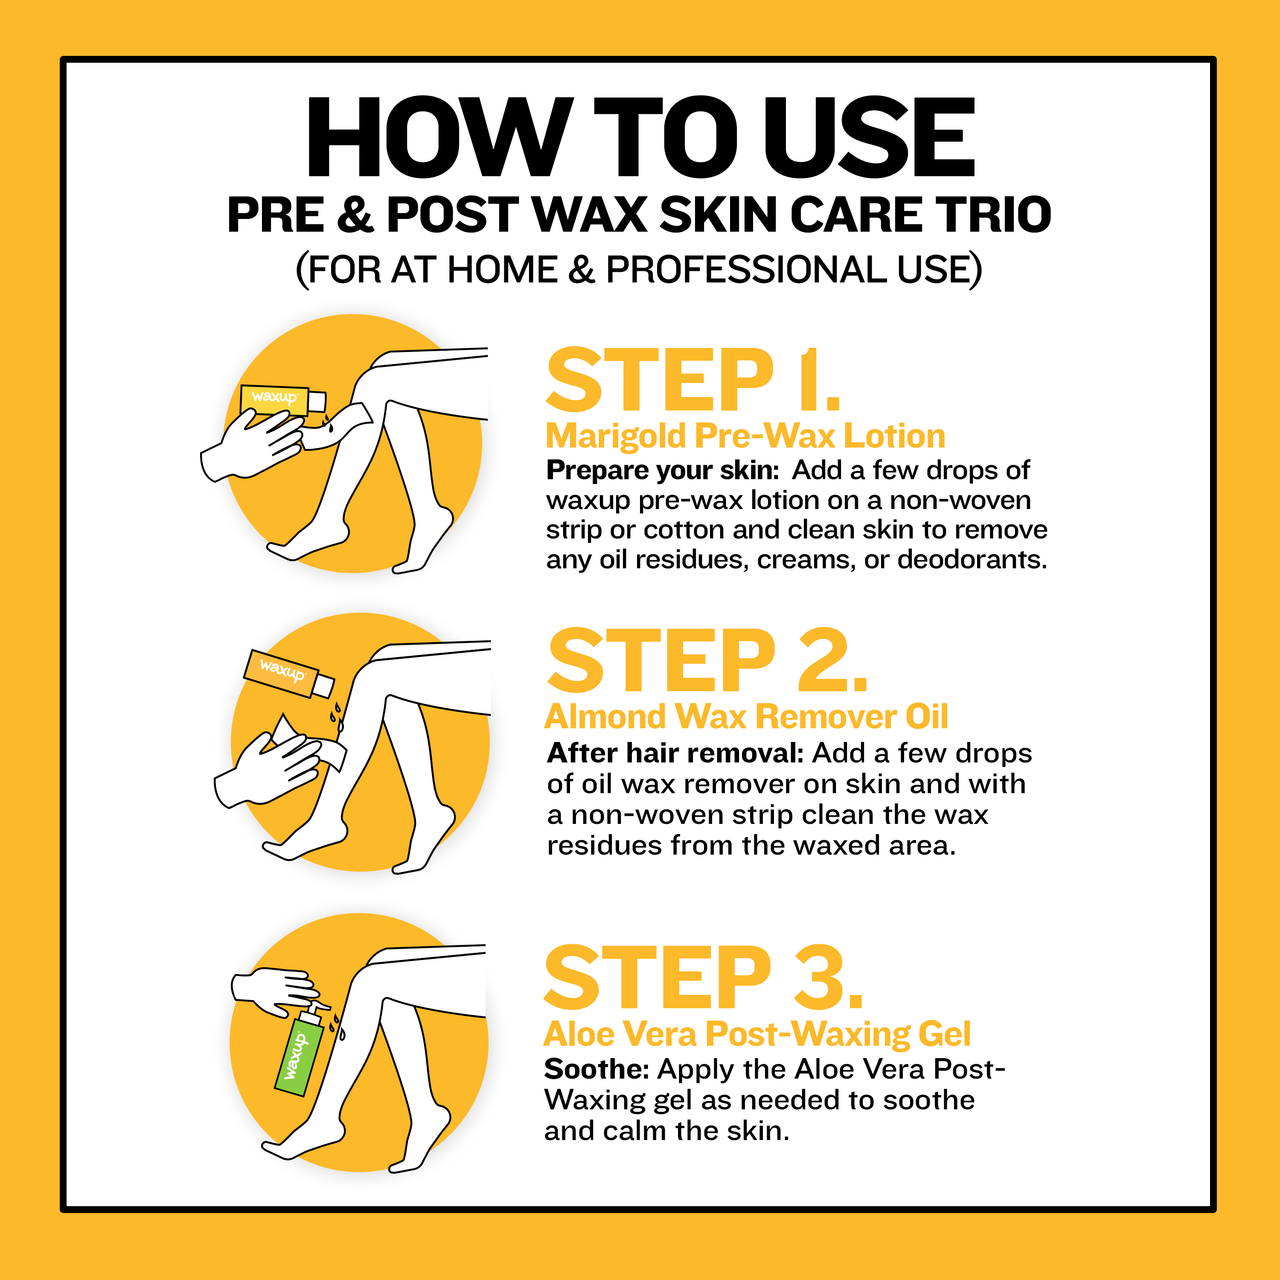 Before And After Waxing Skin Care Kit - thatswaxup -  - Pre and Post Waxing Skin Care - waxup hair removal wax body waxing kit women and men professional waxing supplies